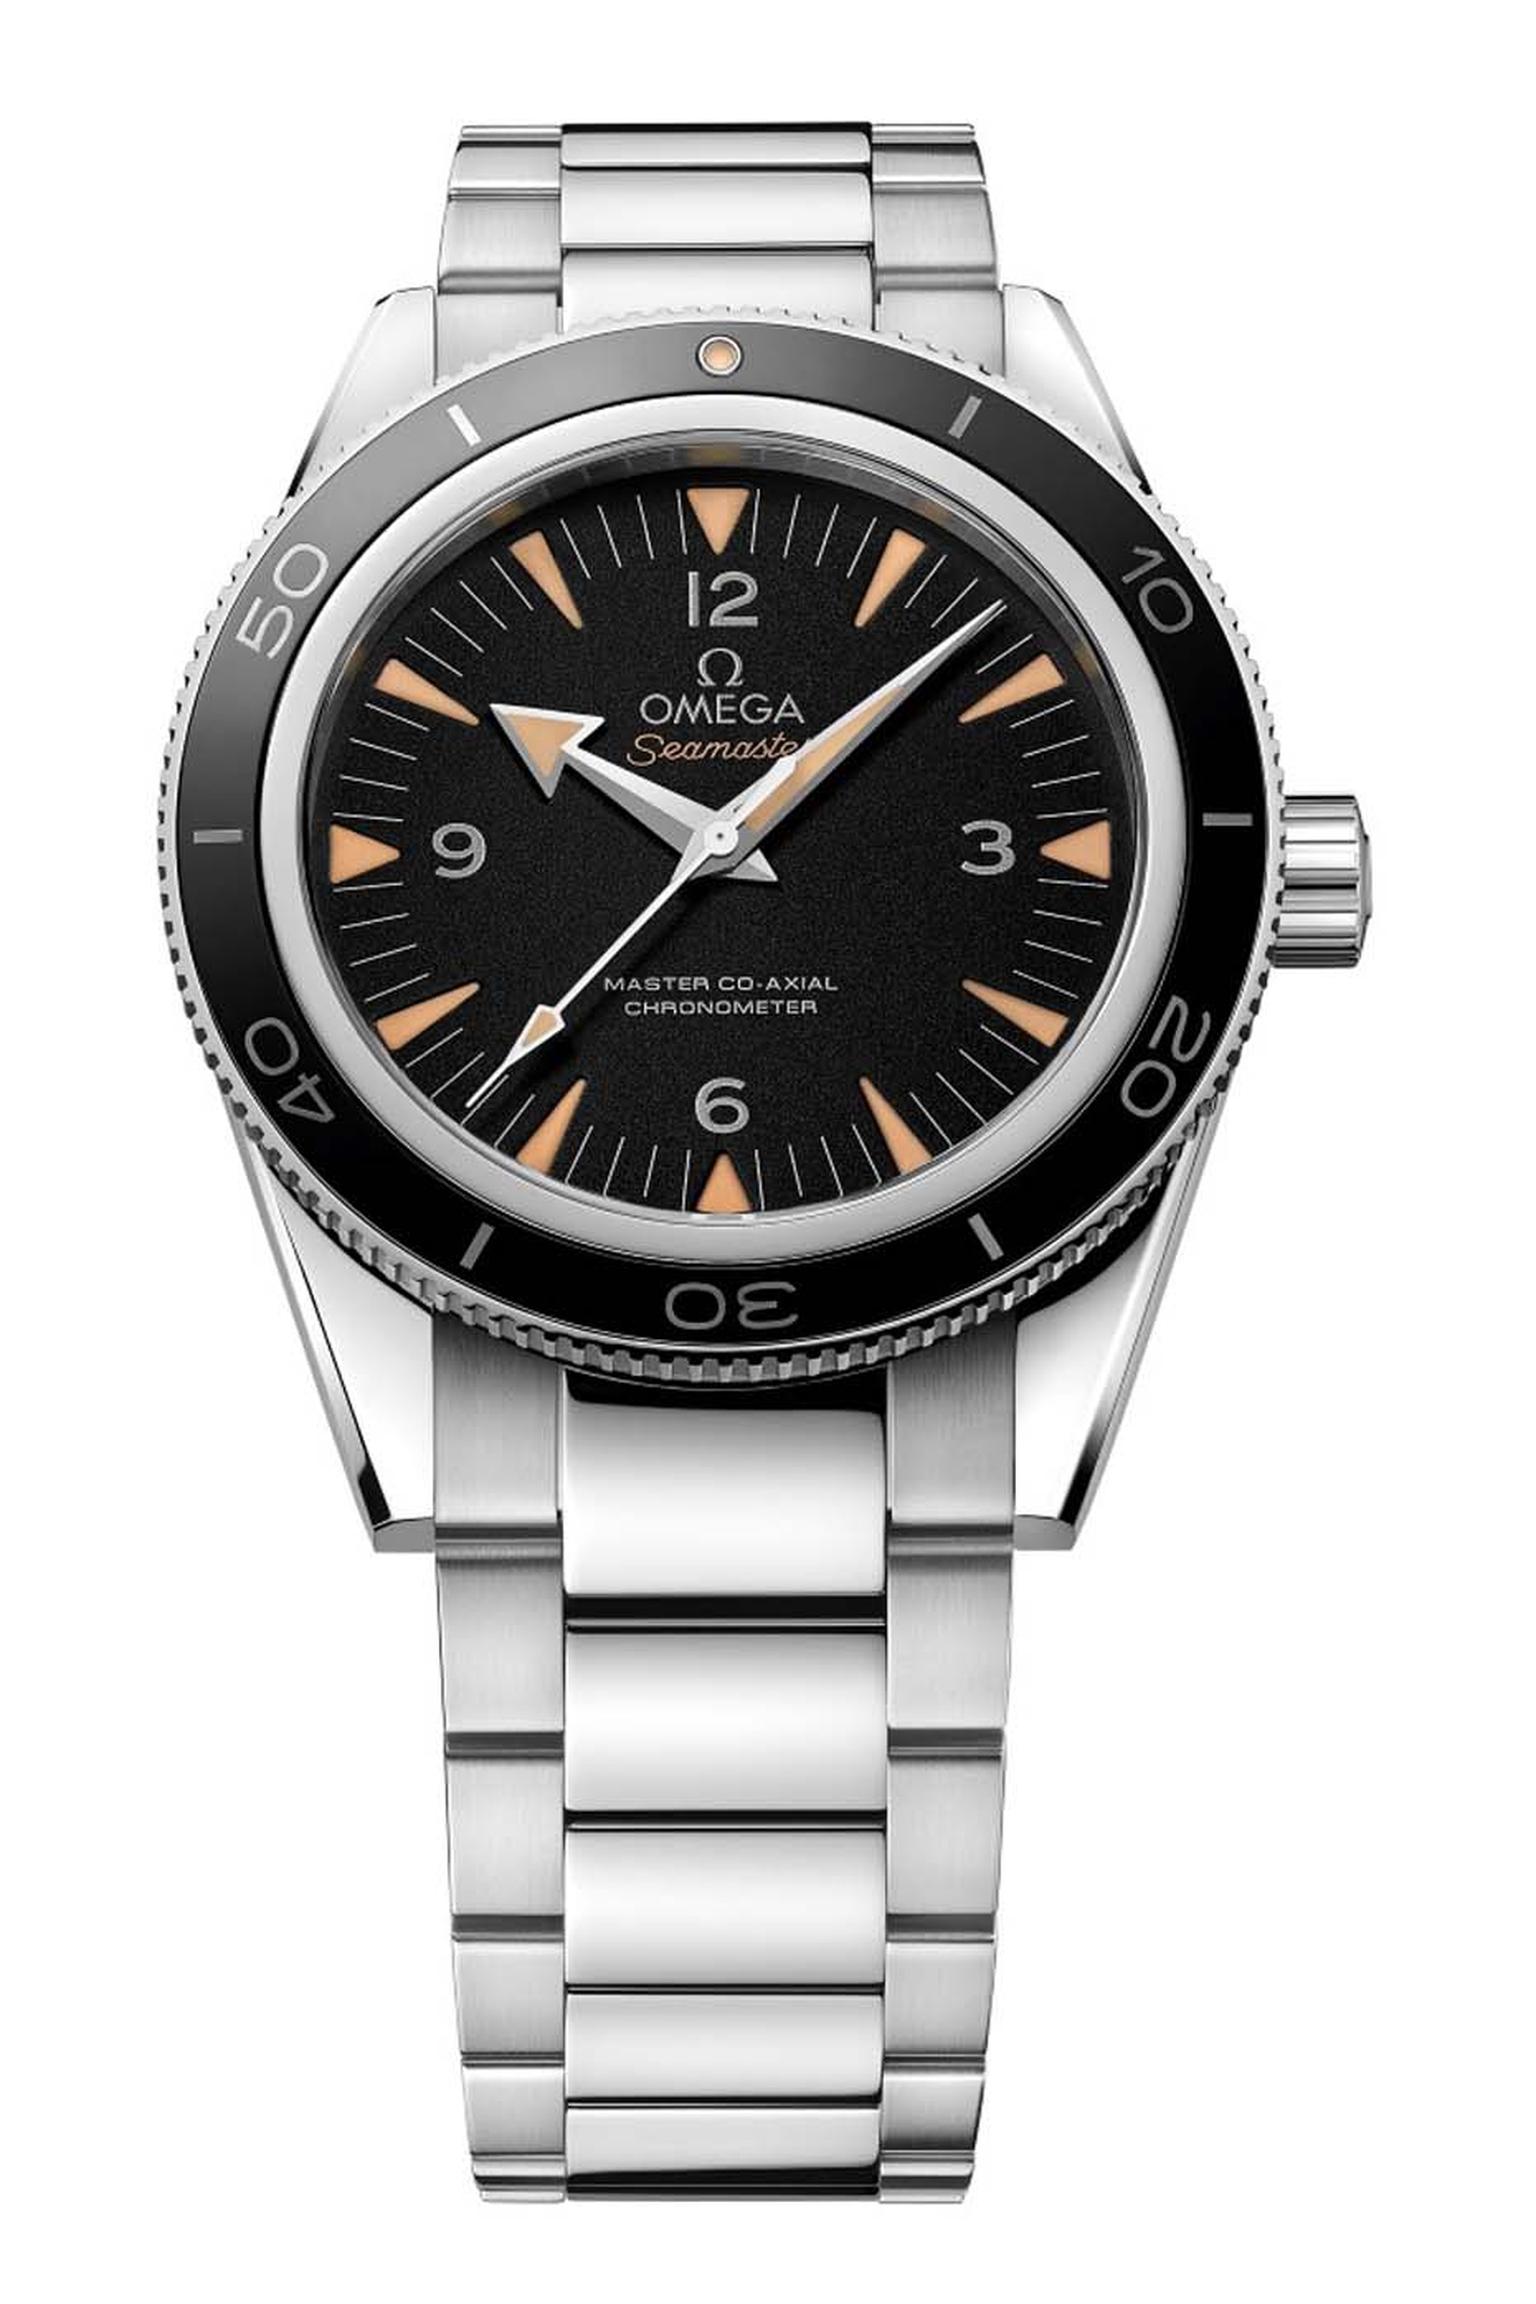 The Omega Seamaster 300 Master Co-Axial 41mm could almost be confused with the original 1957 Seamaster model that marked Omega's plunge in the deep end. Updated with Omega's Co-Axial and anti-magnetic technology, the watch is water-resistant to 300m.